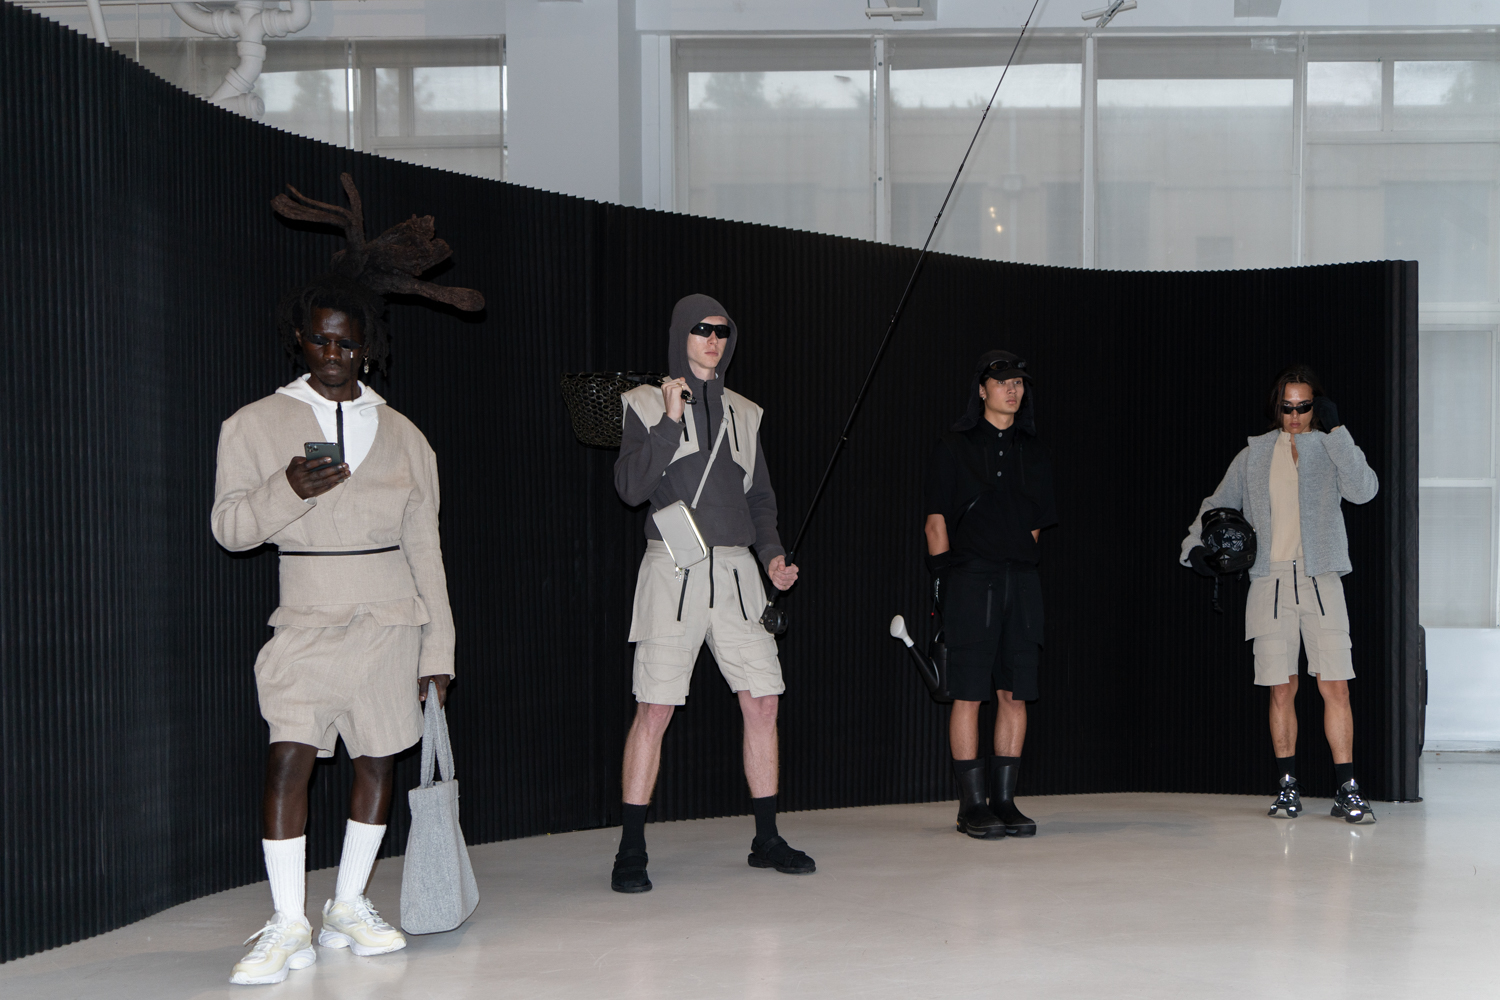 Four models stand in a fashion showroom with a black backdrop and white floors. They are wearing outdoor-themed clothing from the brand TARPLEY. They are holding props including a smartphone, a tote bag, a fishing rod, a watering can and a helmet.